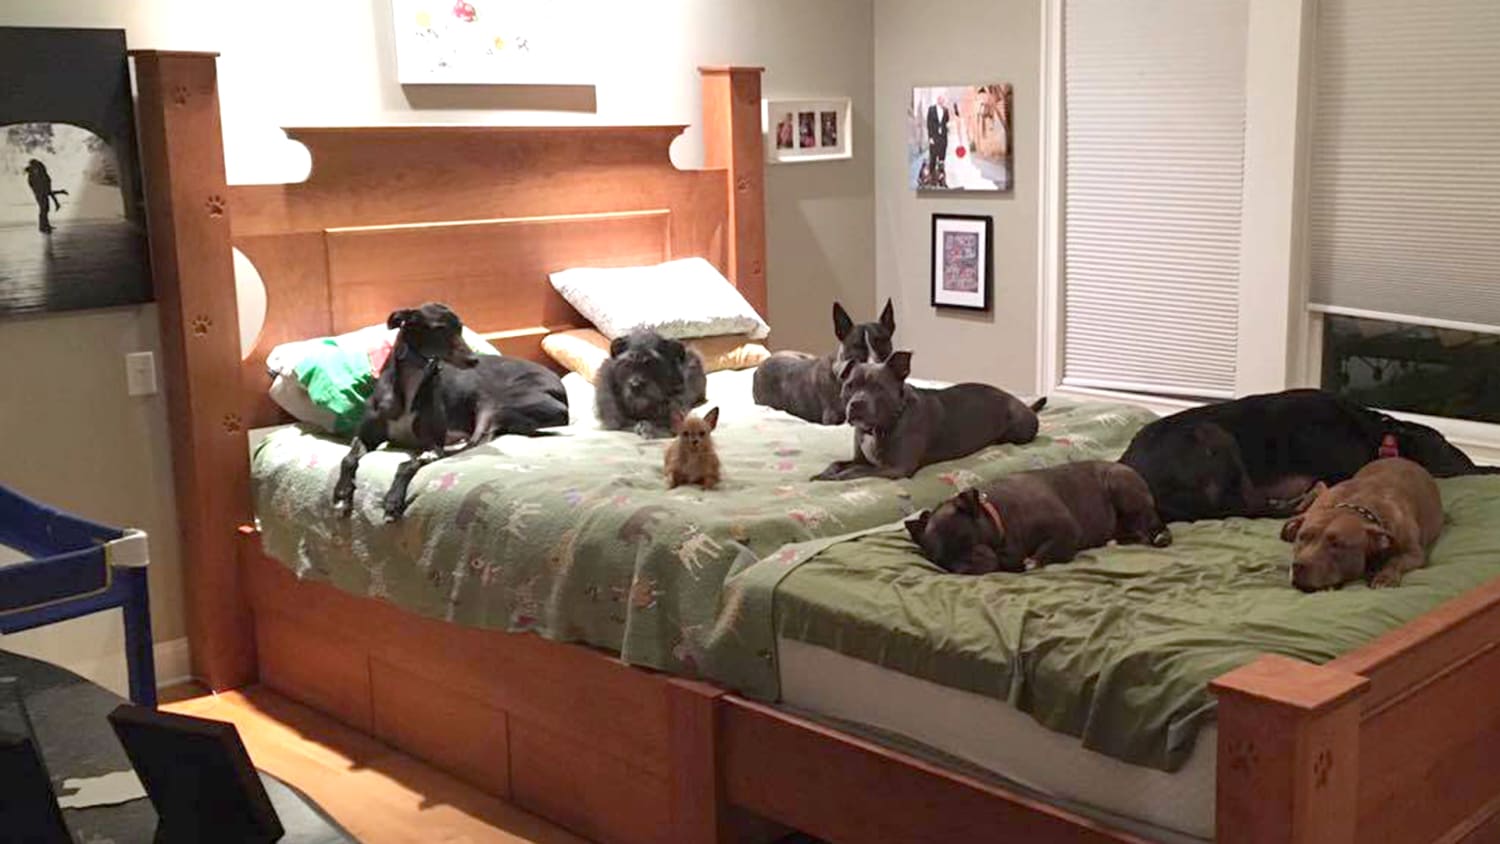 Giant Bed To Sleep Comfortably With 8 Dogs, King Bed With Doggie Insert